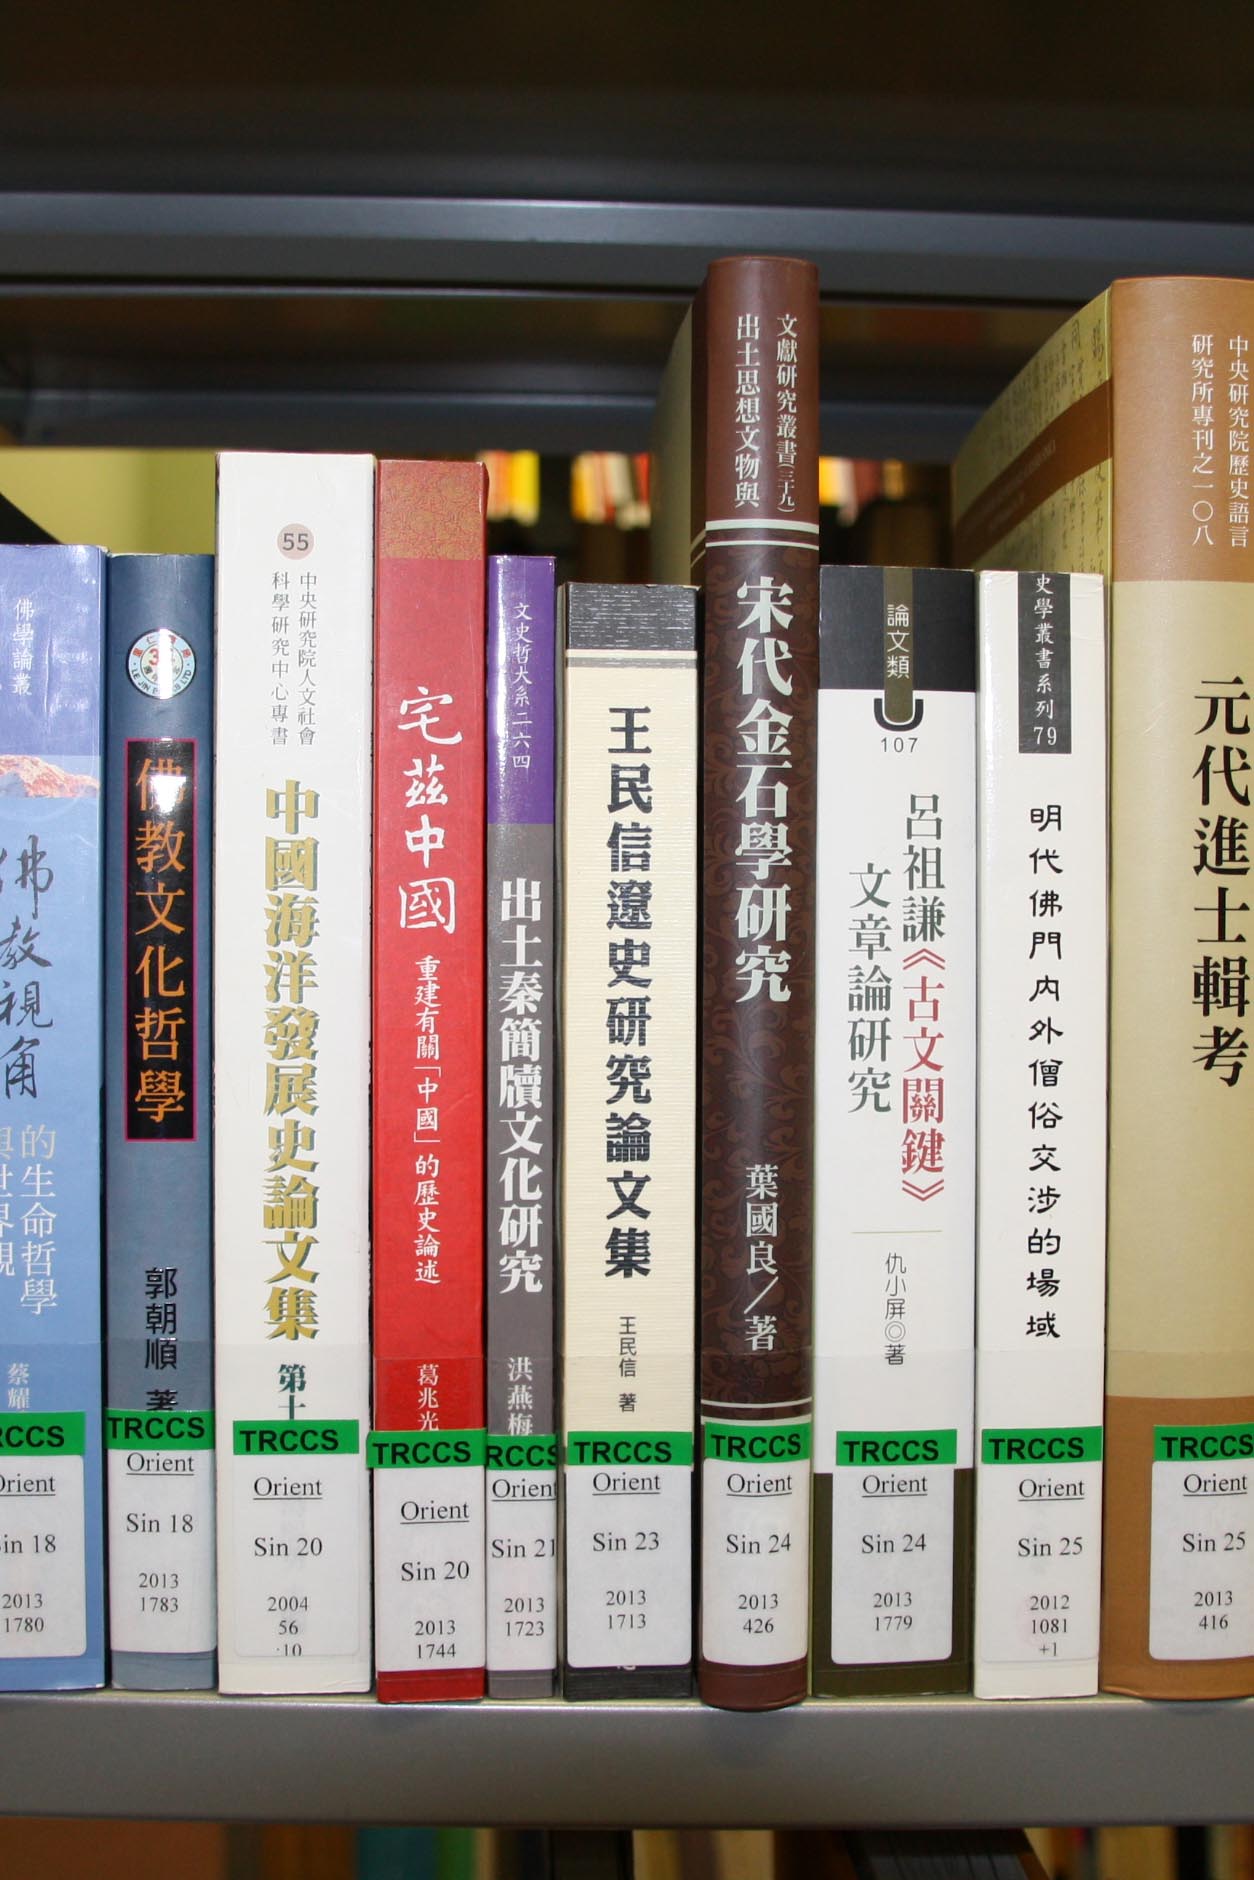 Taiwan Resource Center for Chinese Studies